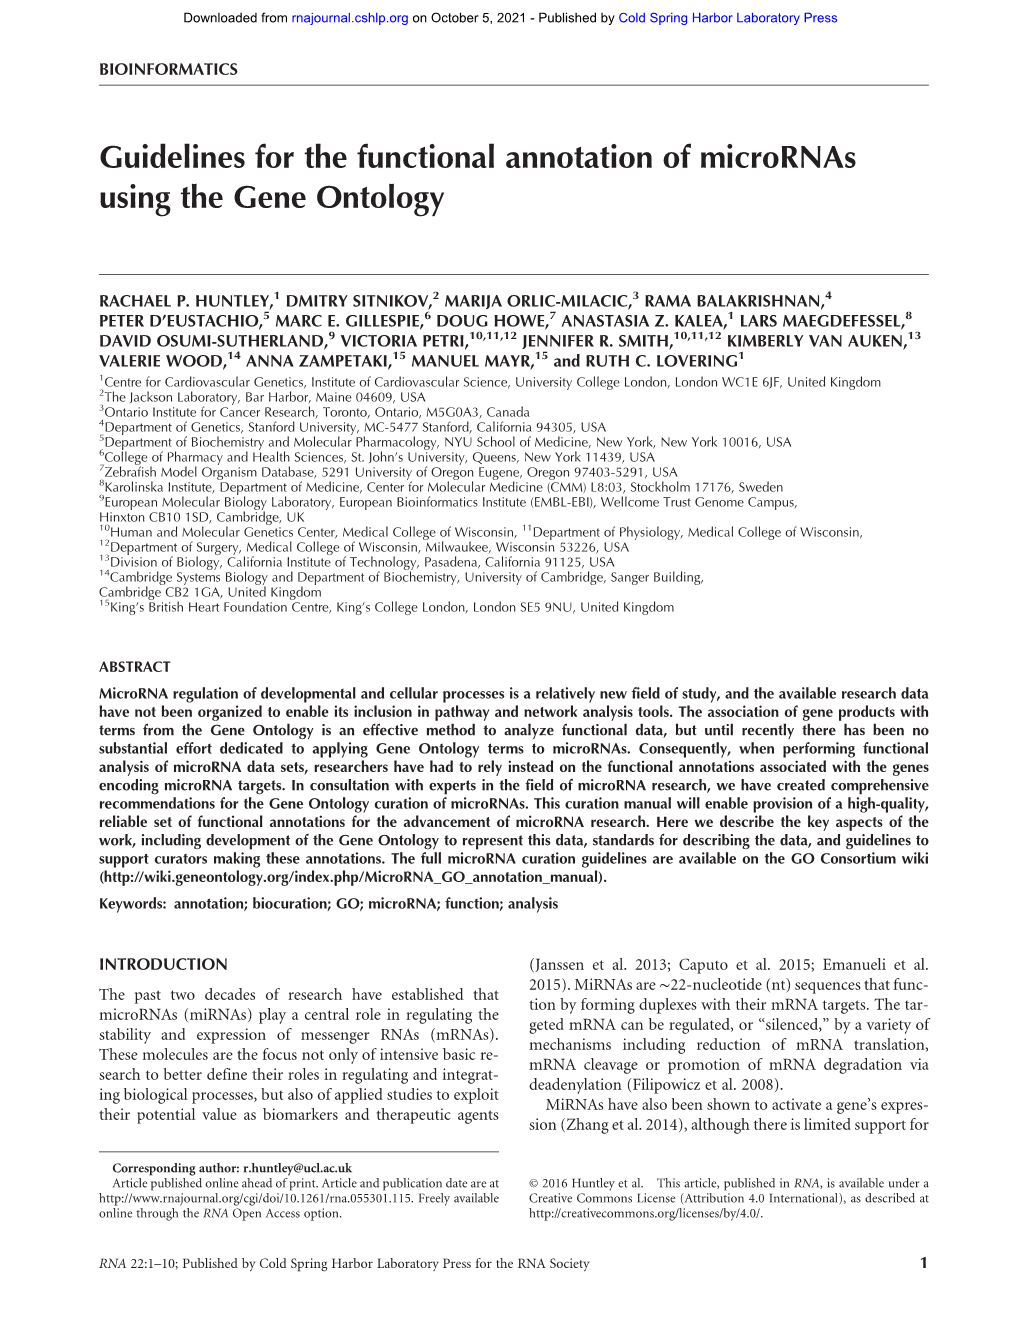 Guidelines for the Functional Annotation of Micrornas Using the Gene Ontology